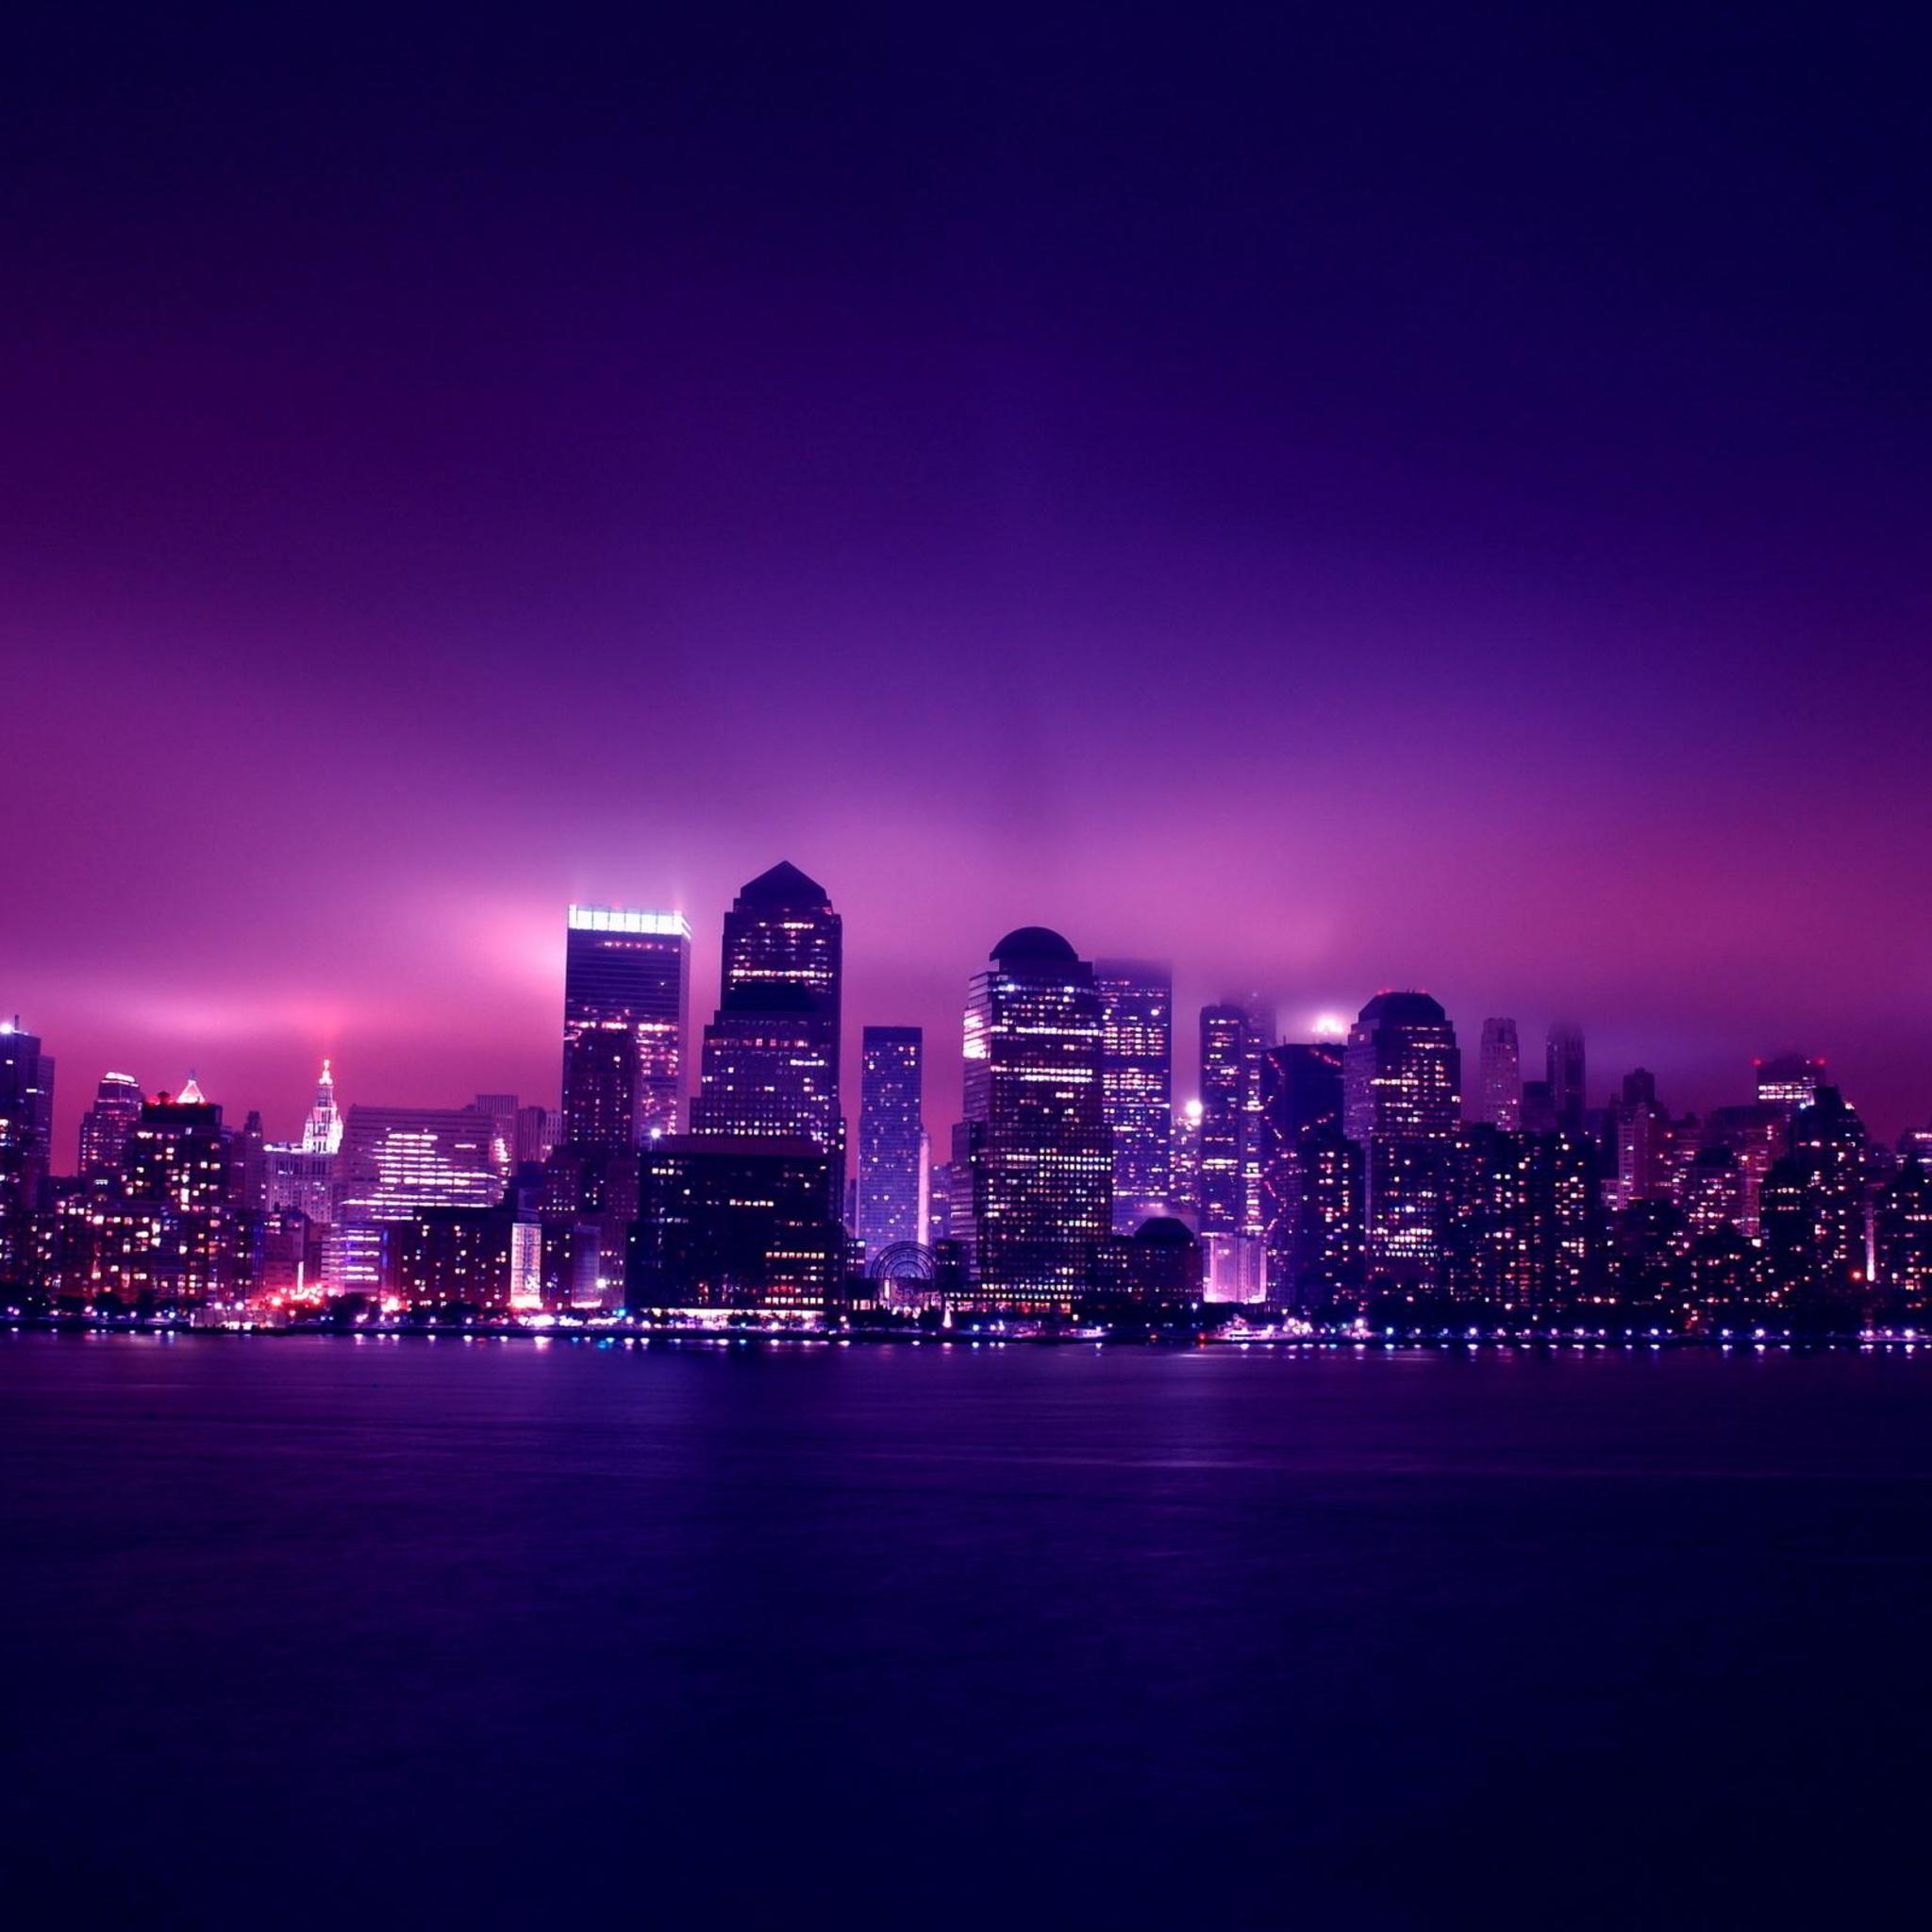 Cute iPad background featuring a city skyline at night with purple lights and a purple sky